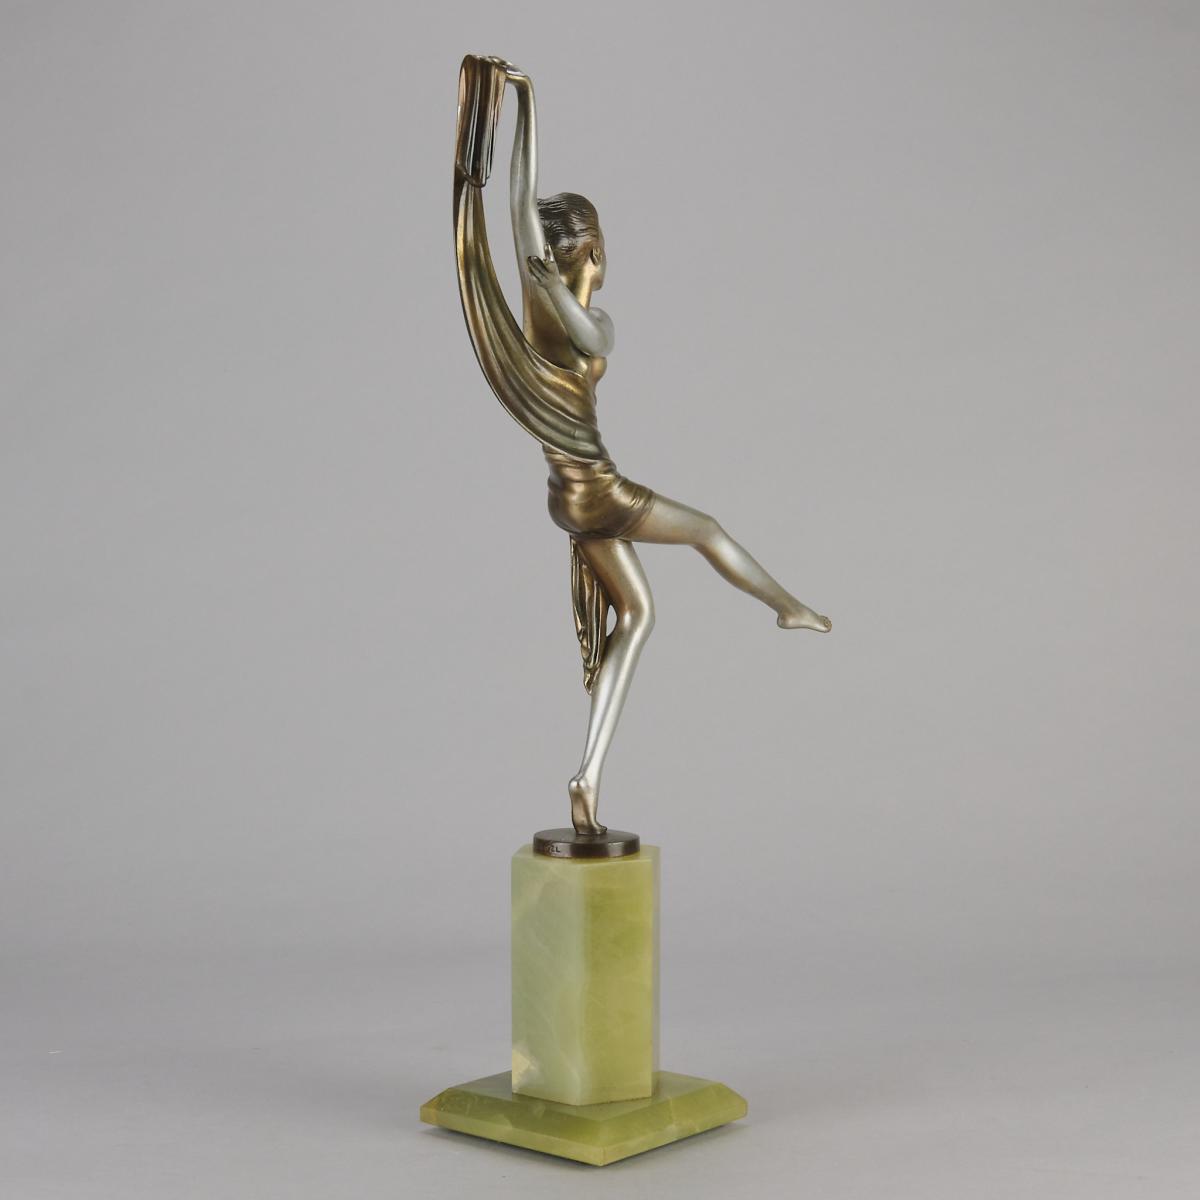 Early 20th Century Cold-Painted Art Deco Bronze entitled "Charlotte" by Lorenzl